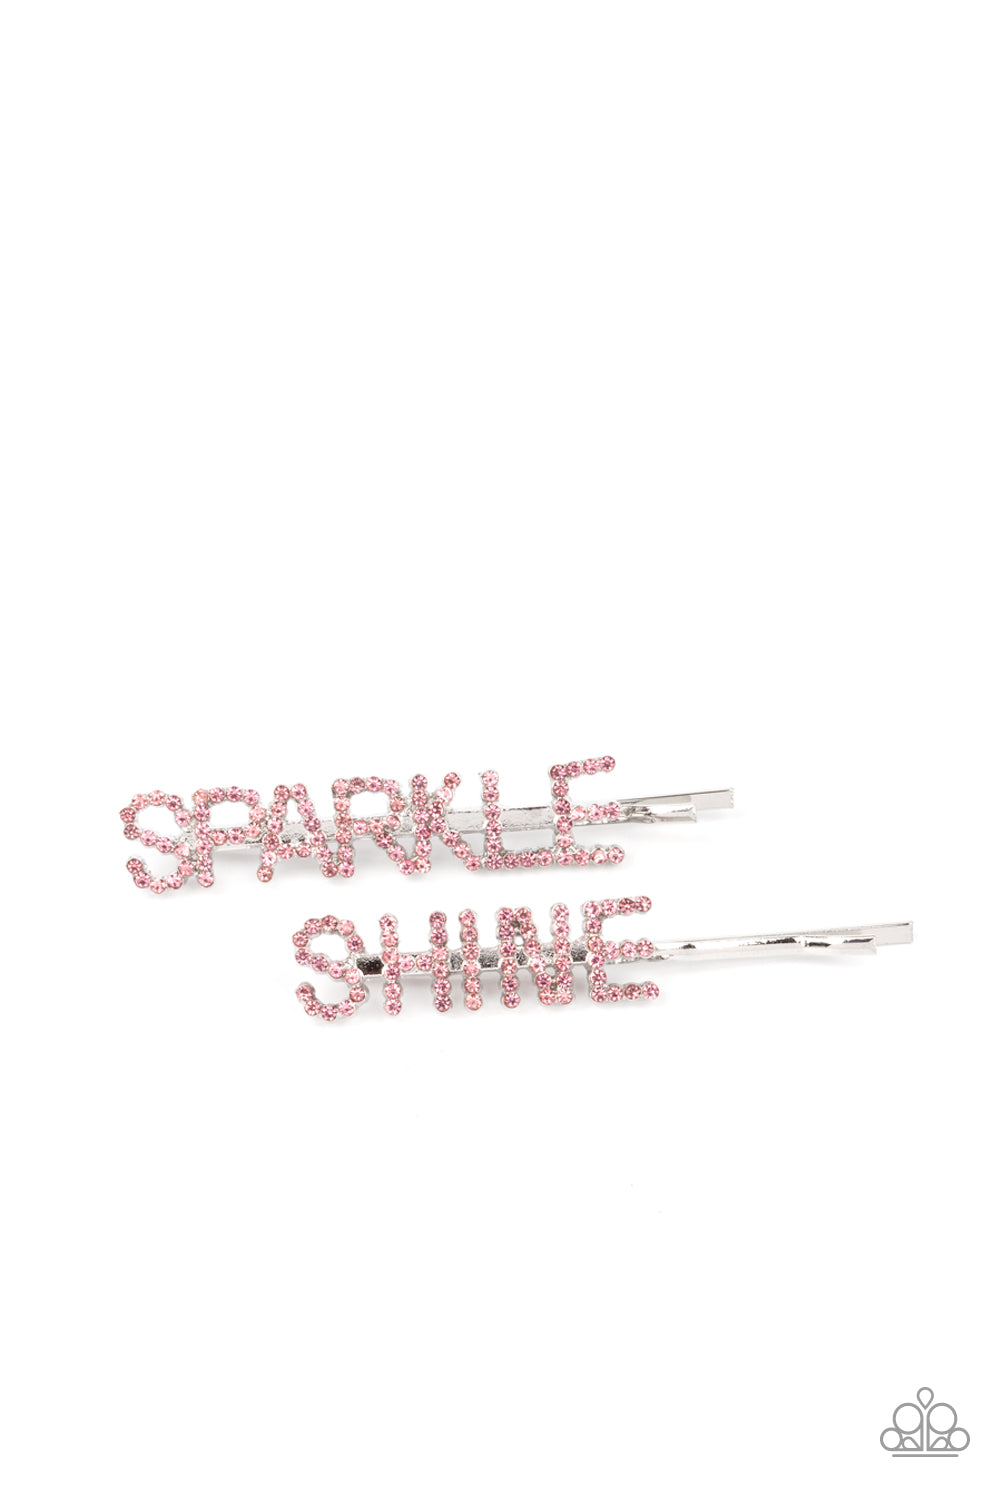 Paparazzi ♥ Center of the SPARKLE-verse - Pink ♥  Hair Clip